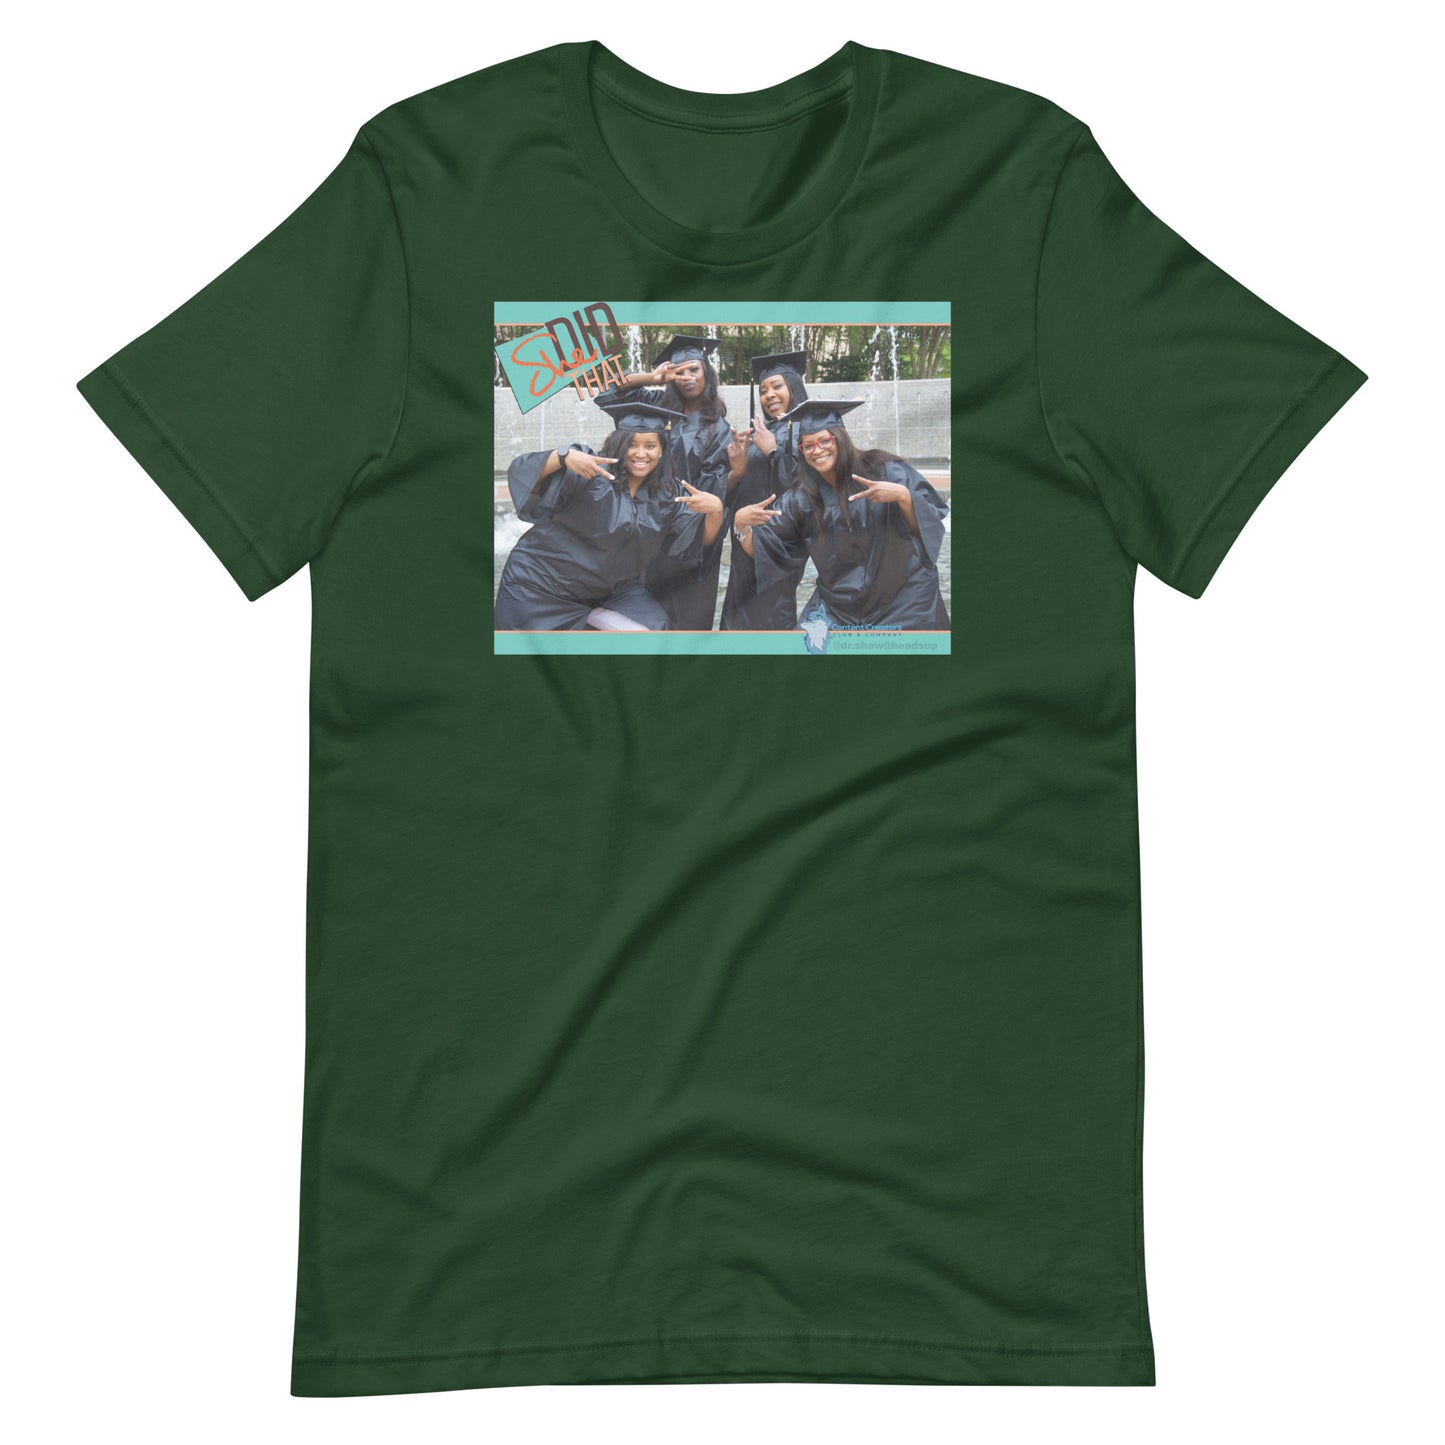 She Did That Cap and Gown Unisex t-shirt